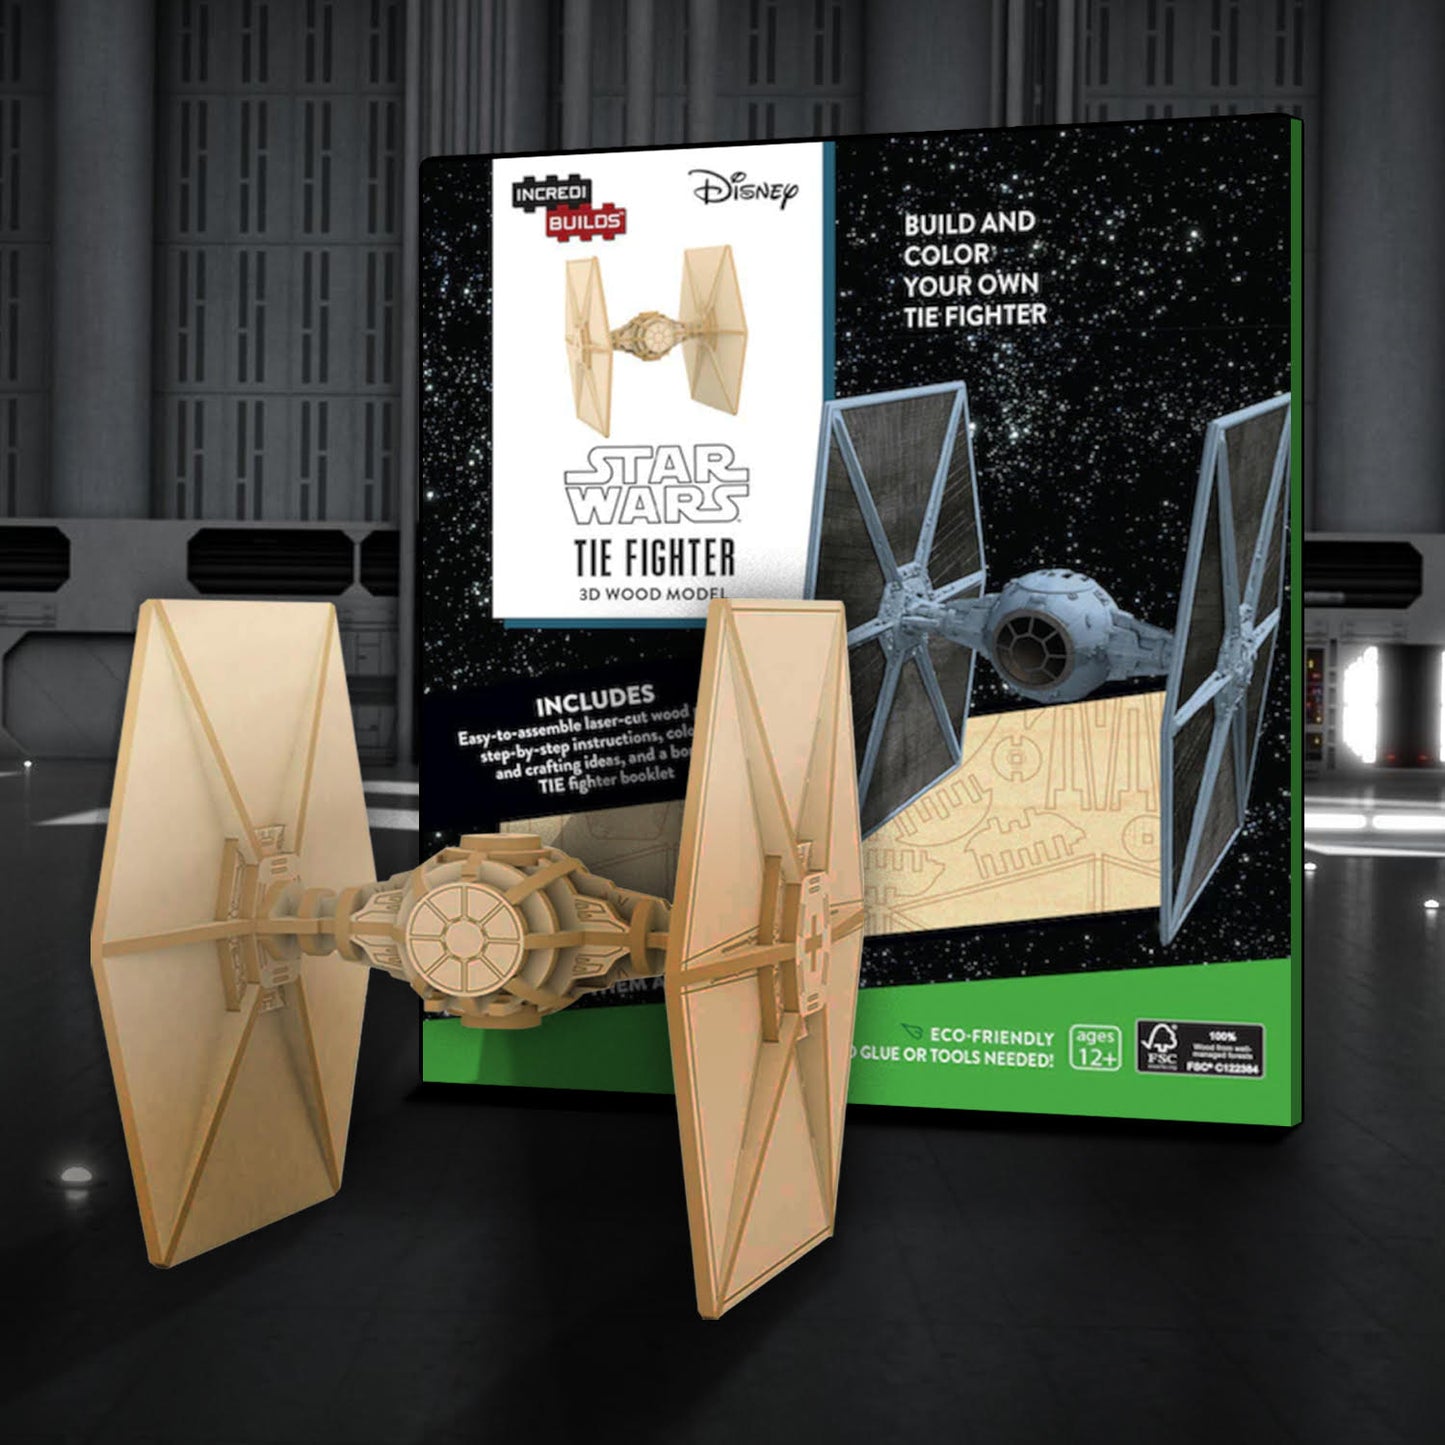 A box depicting a TIE Fighter from the Star Wars movies. The box is sitting against a dark grey starship background and depcits a wood model version next to it. Below the ship is a wood sheet with the model parts to be assembled. In front of the box is an assembled and unpainted TIE fighter model.